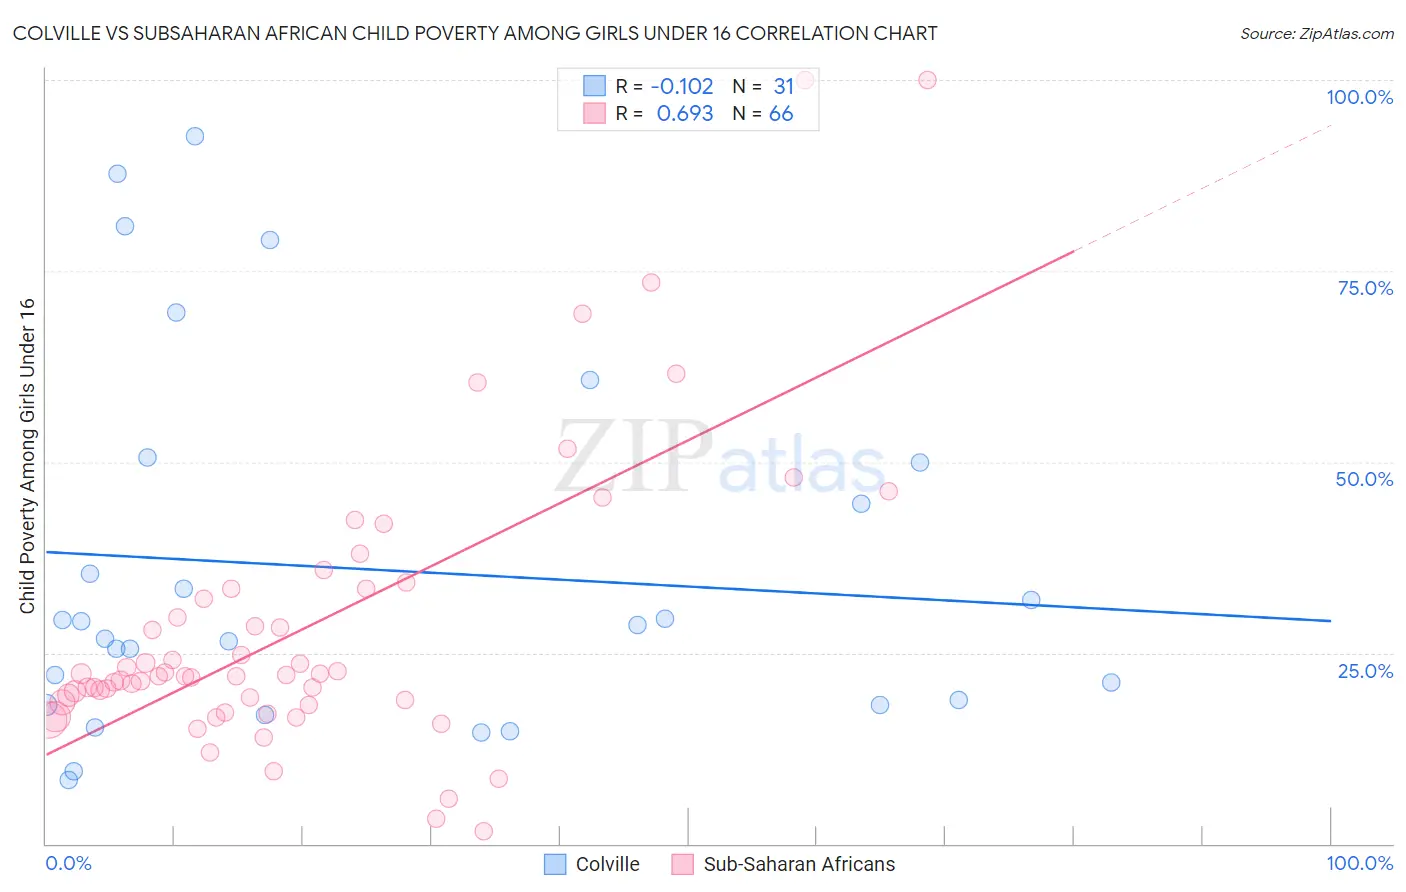 Colville vs Subsaharan African Child Poverty Among Girls Under 16